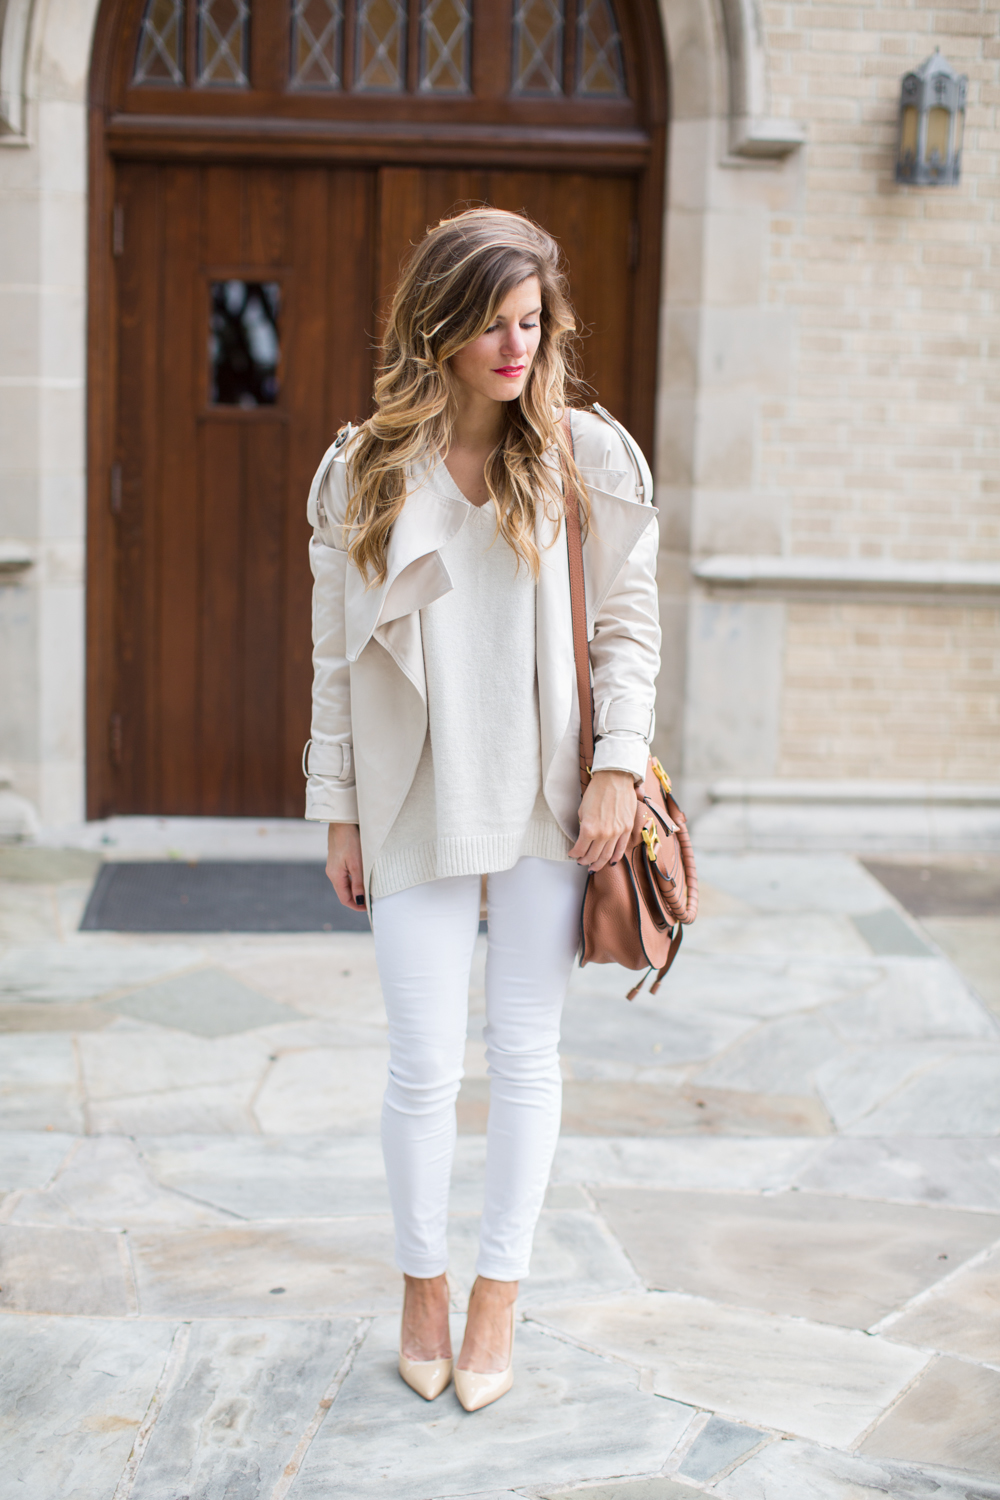 Wearing Winter White - Winter white outfit with complementary cream hues